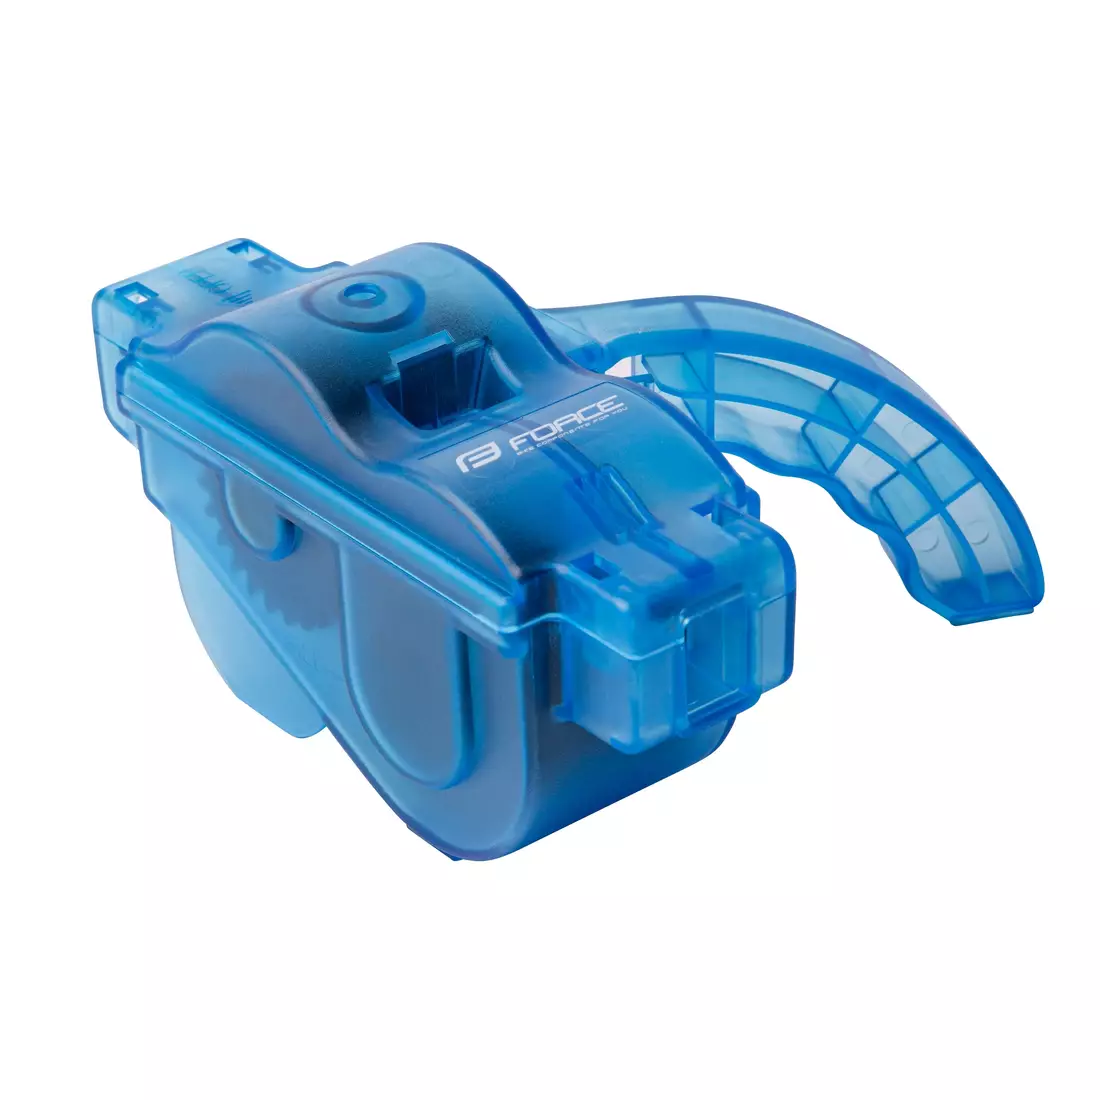 FORCE chain cleaning tool blue 89465